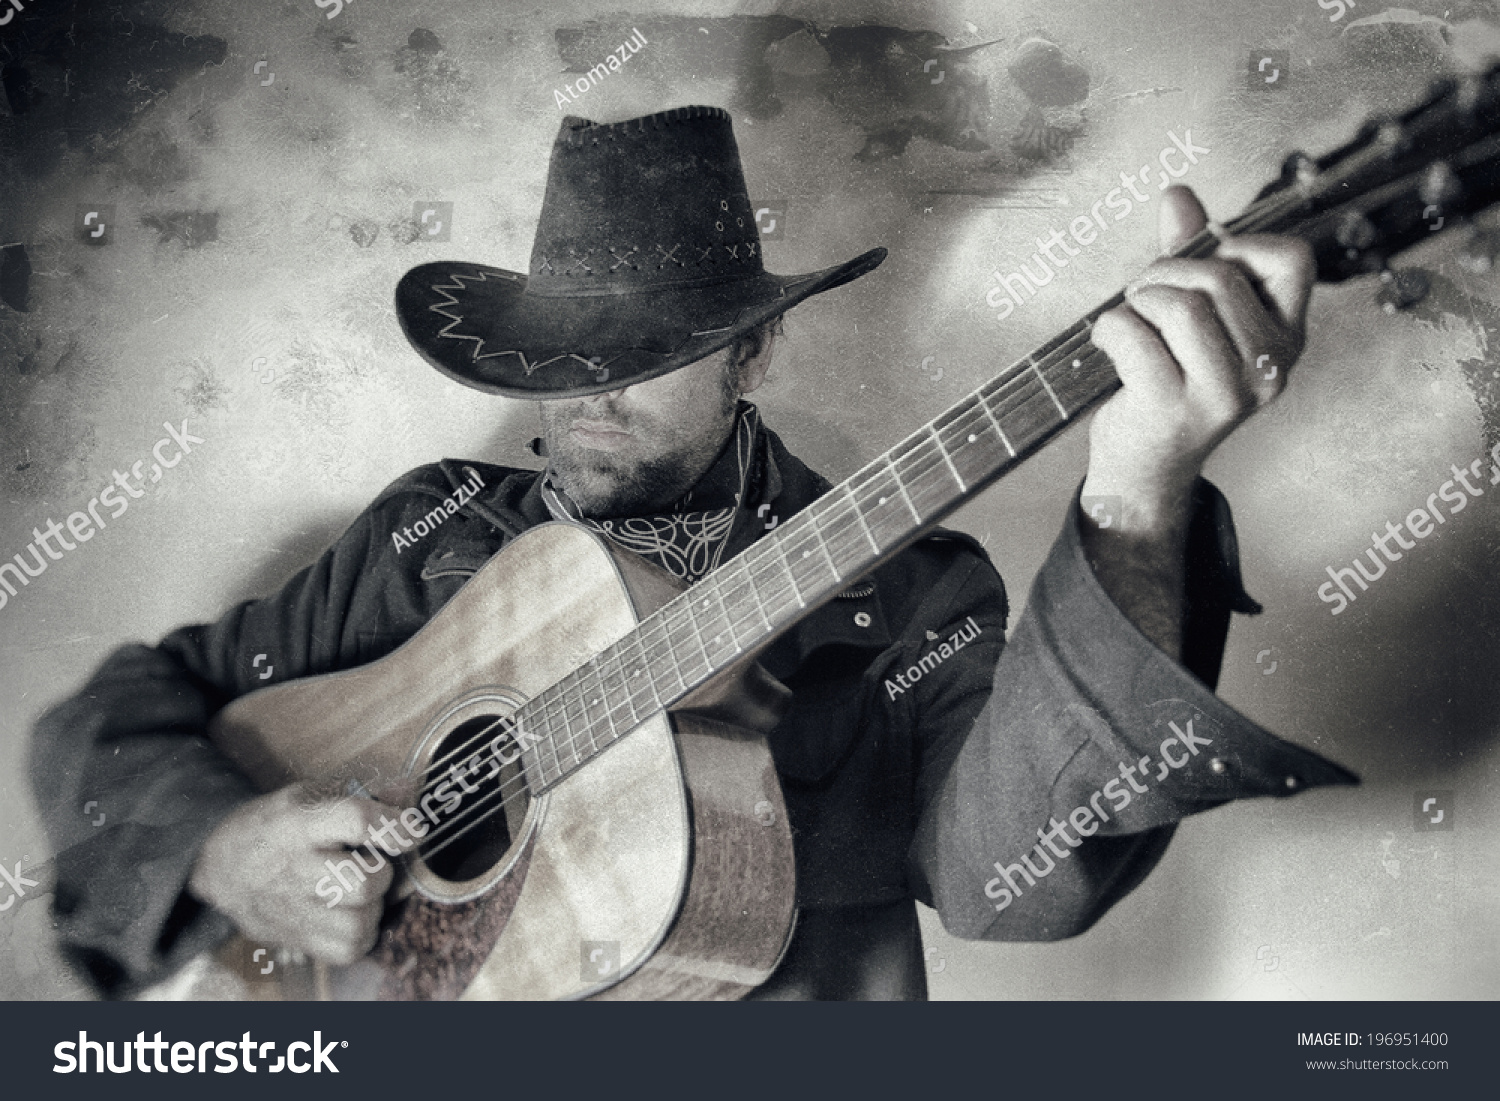 Old West Cowboy With Guitar. A cowboy playing a guitar, edited in vintage film style. #196951400